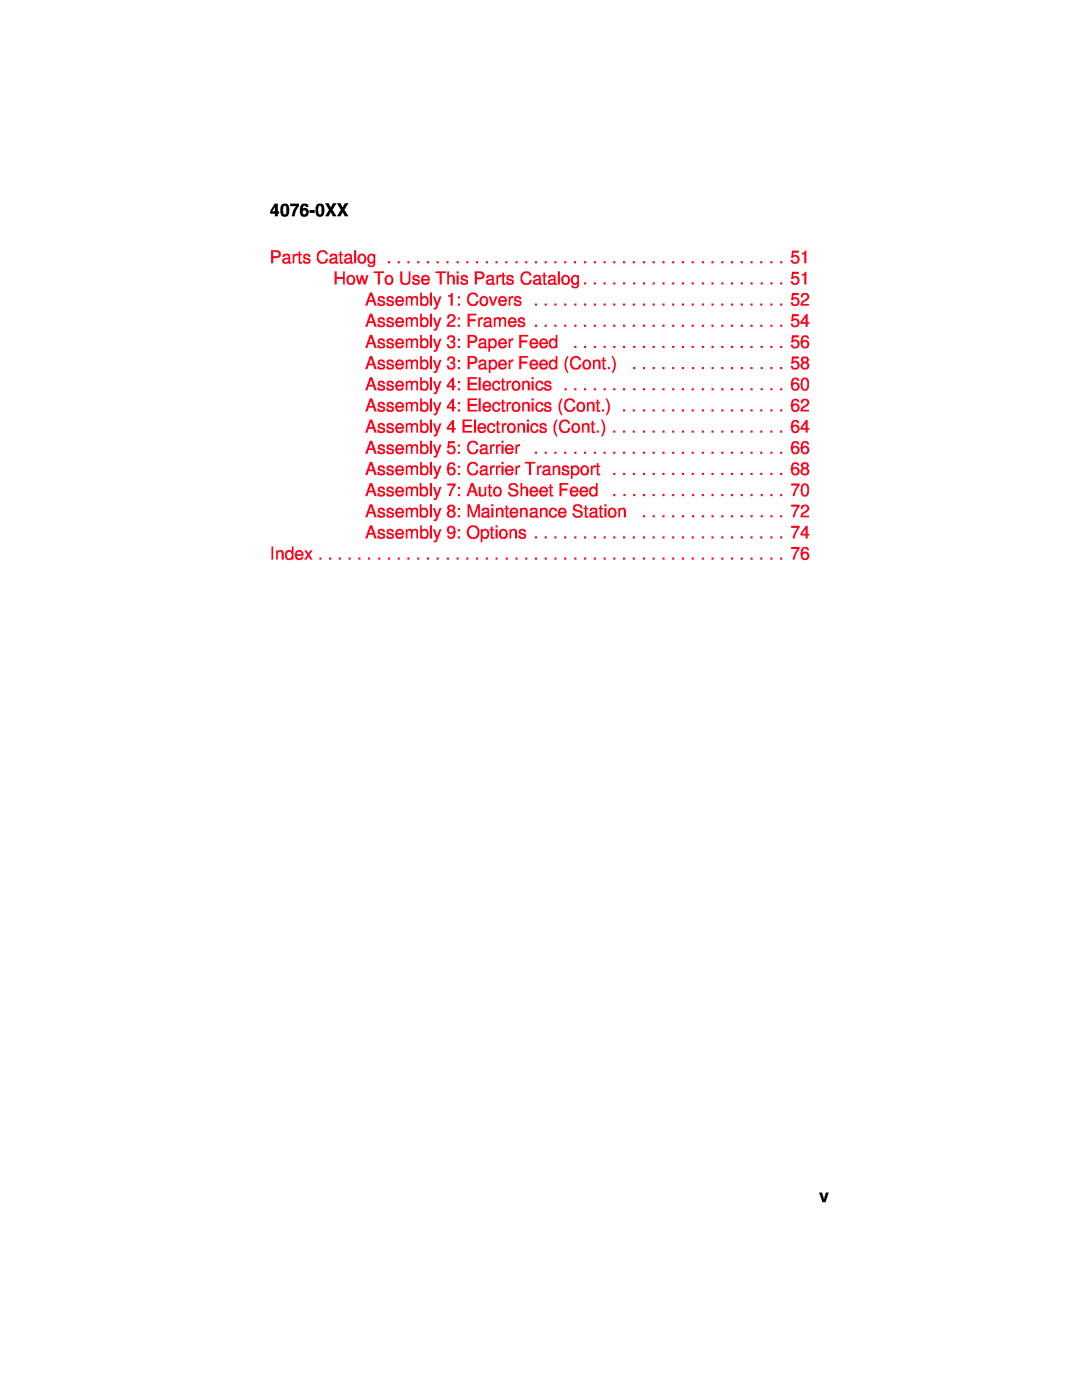 Lexmark 4076-0XX manual How To Use This Parts Catalog 